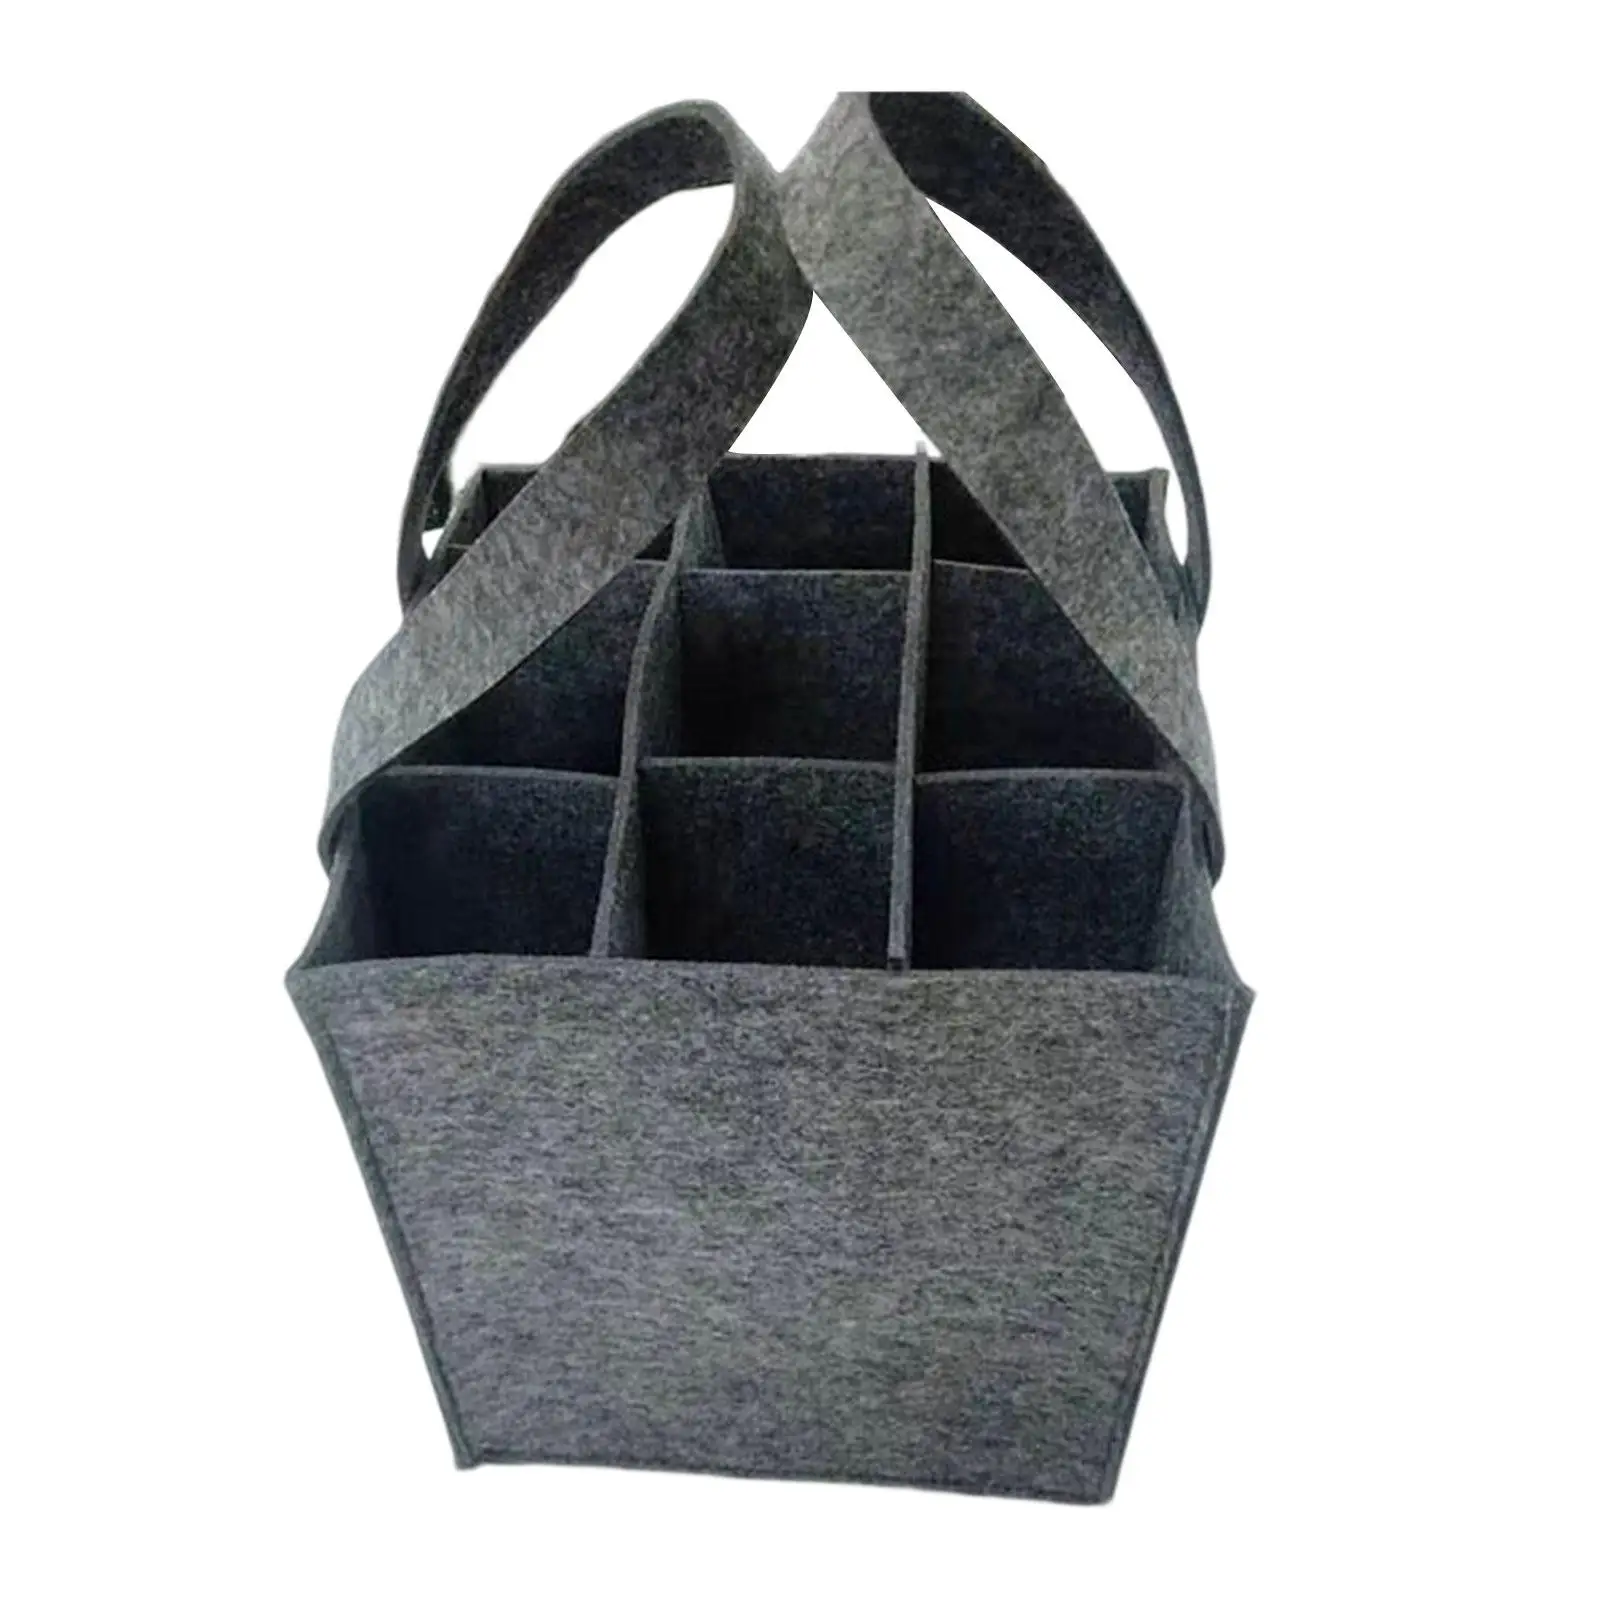 Bottle Bag Shopping Bags with Compartment Felt for Wedding Gift Thanksgiving